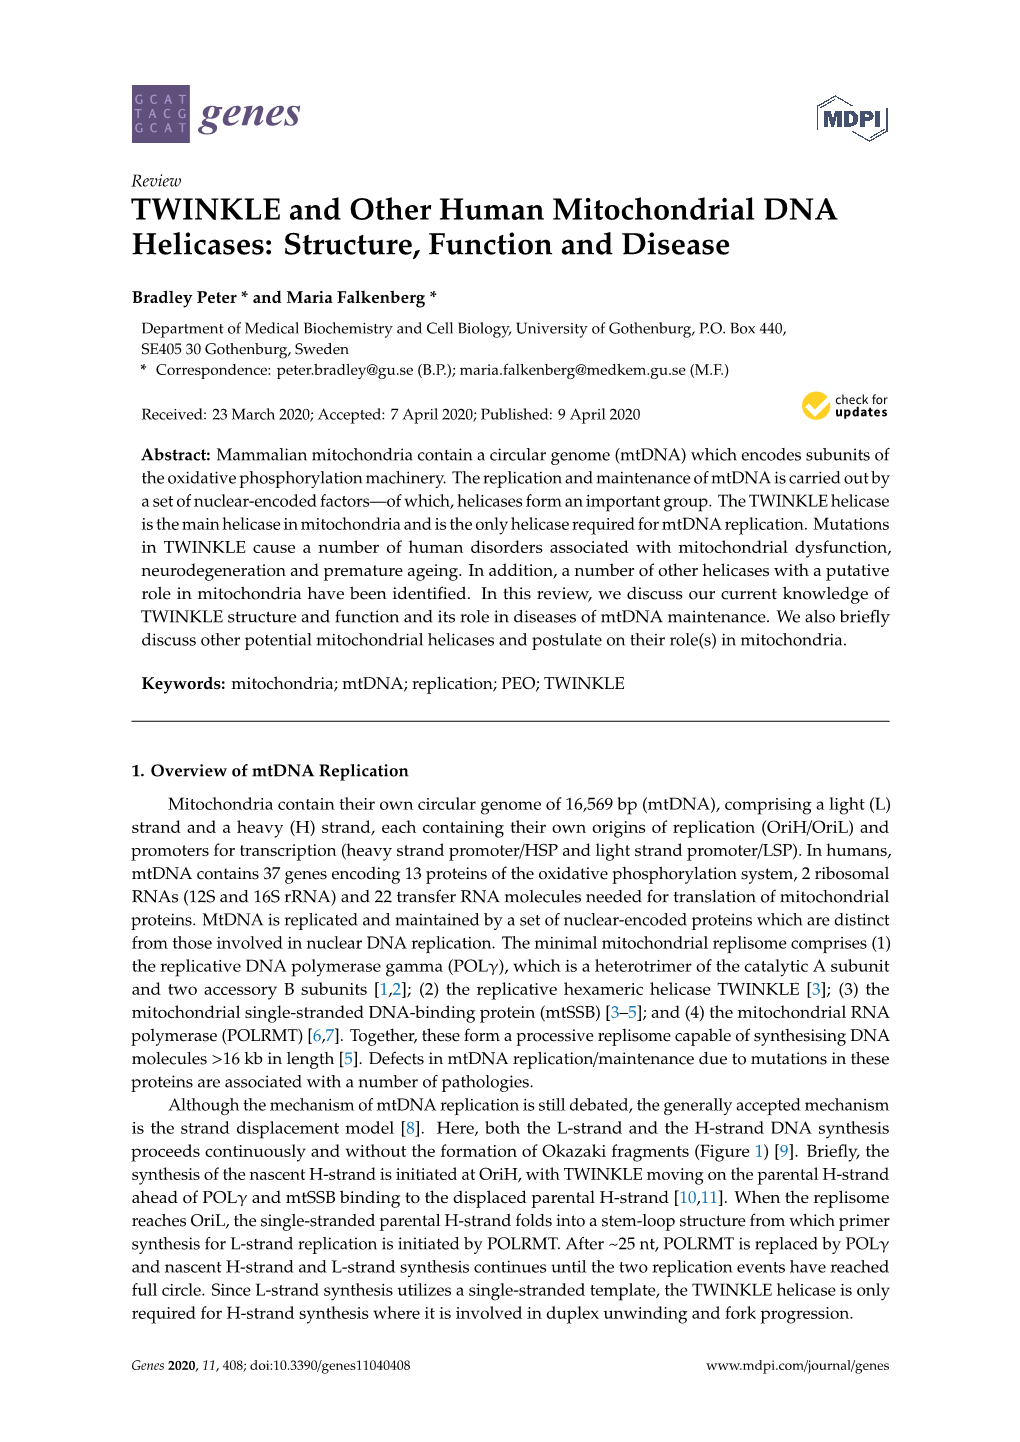 TWINKLE and Other Human Mitochondrial DNA Helicases: Structure, Function and Disease